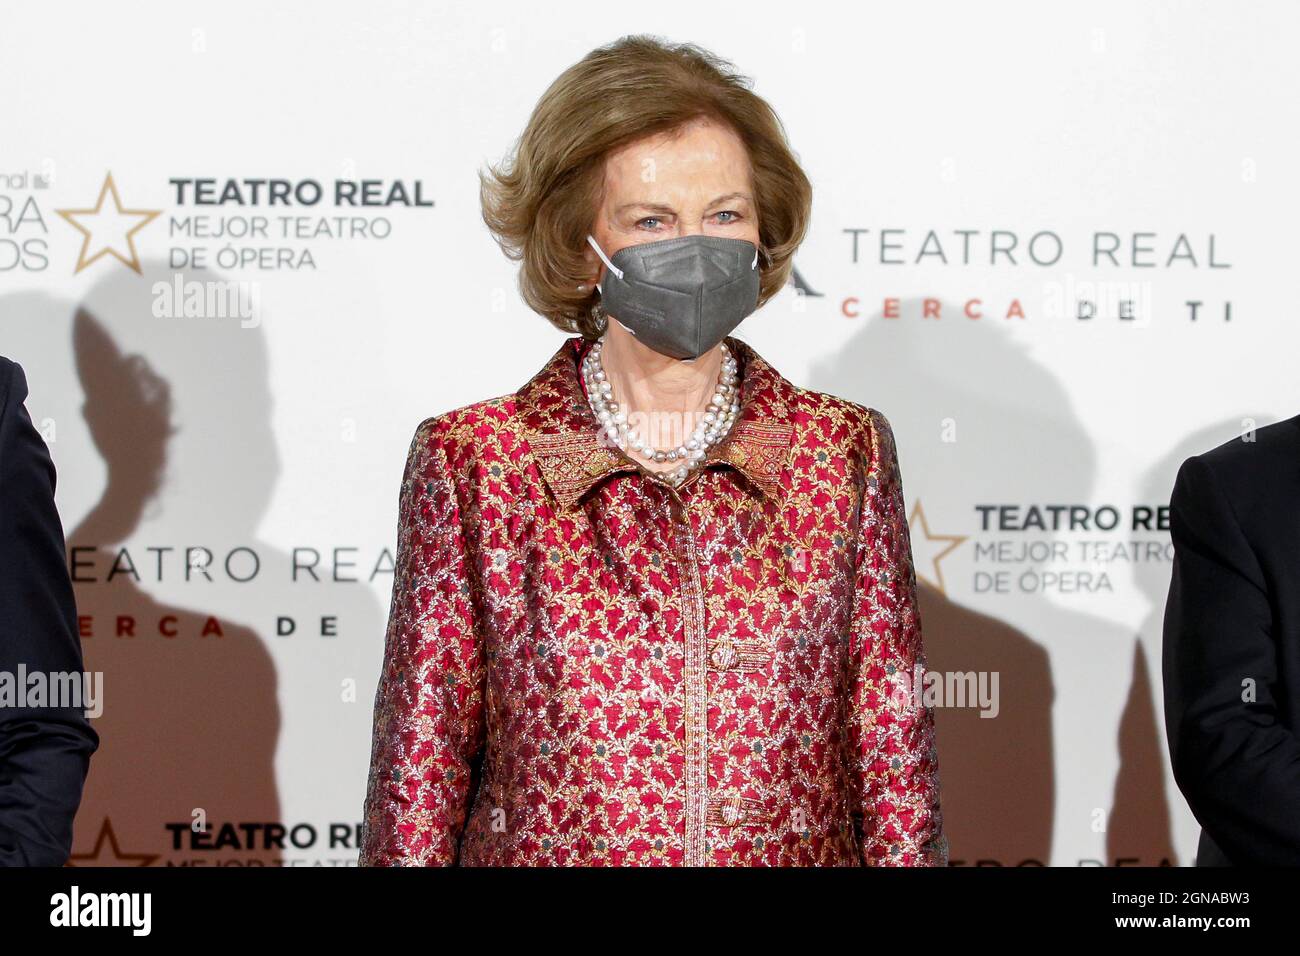 Madrid, Spain. 23rd Sep, 2021. Queen Sofia attends the opening of the Royal theater season 2021/22 at the Royal theater in Madrid, Spain on September 23, 2021. Photo by Archie Andrews/ABACAPRESS.COM Credit: Abaca Press/Alamy Live News Stock Photo